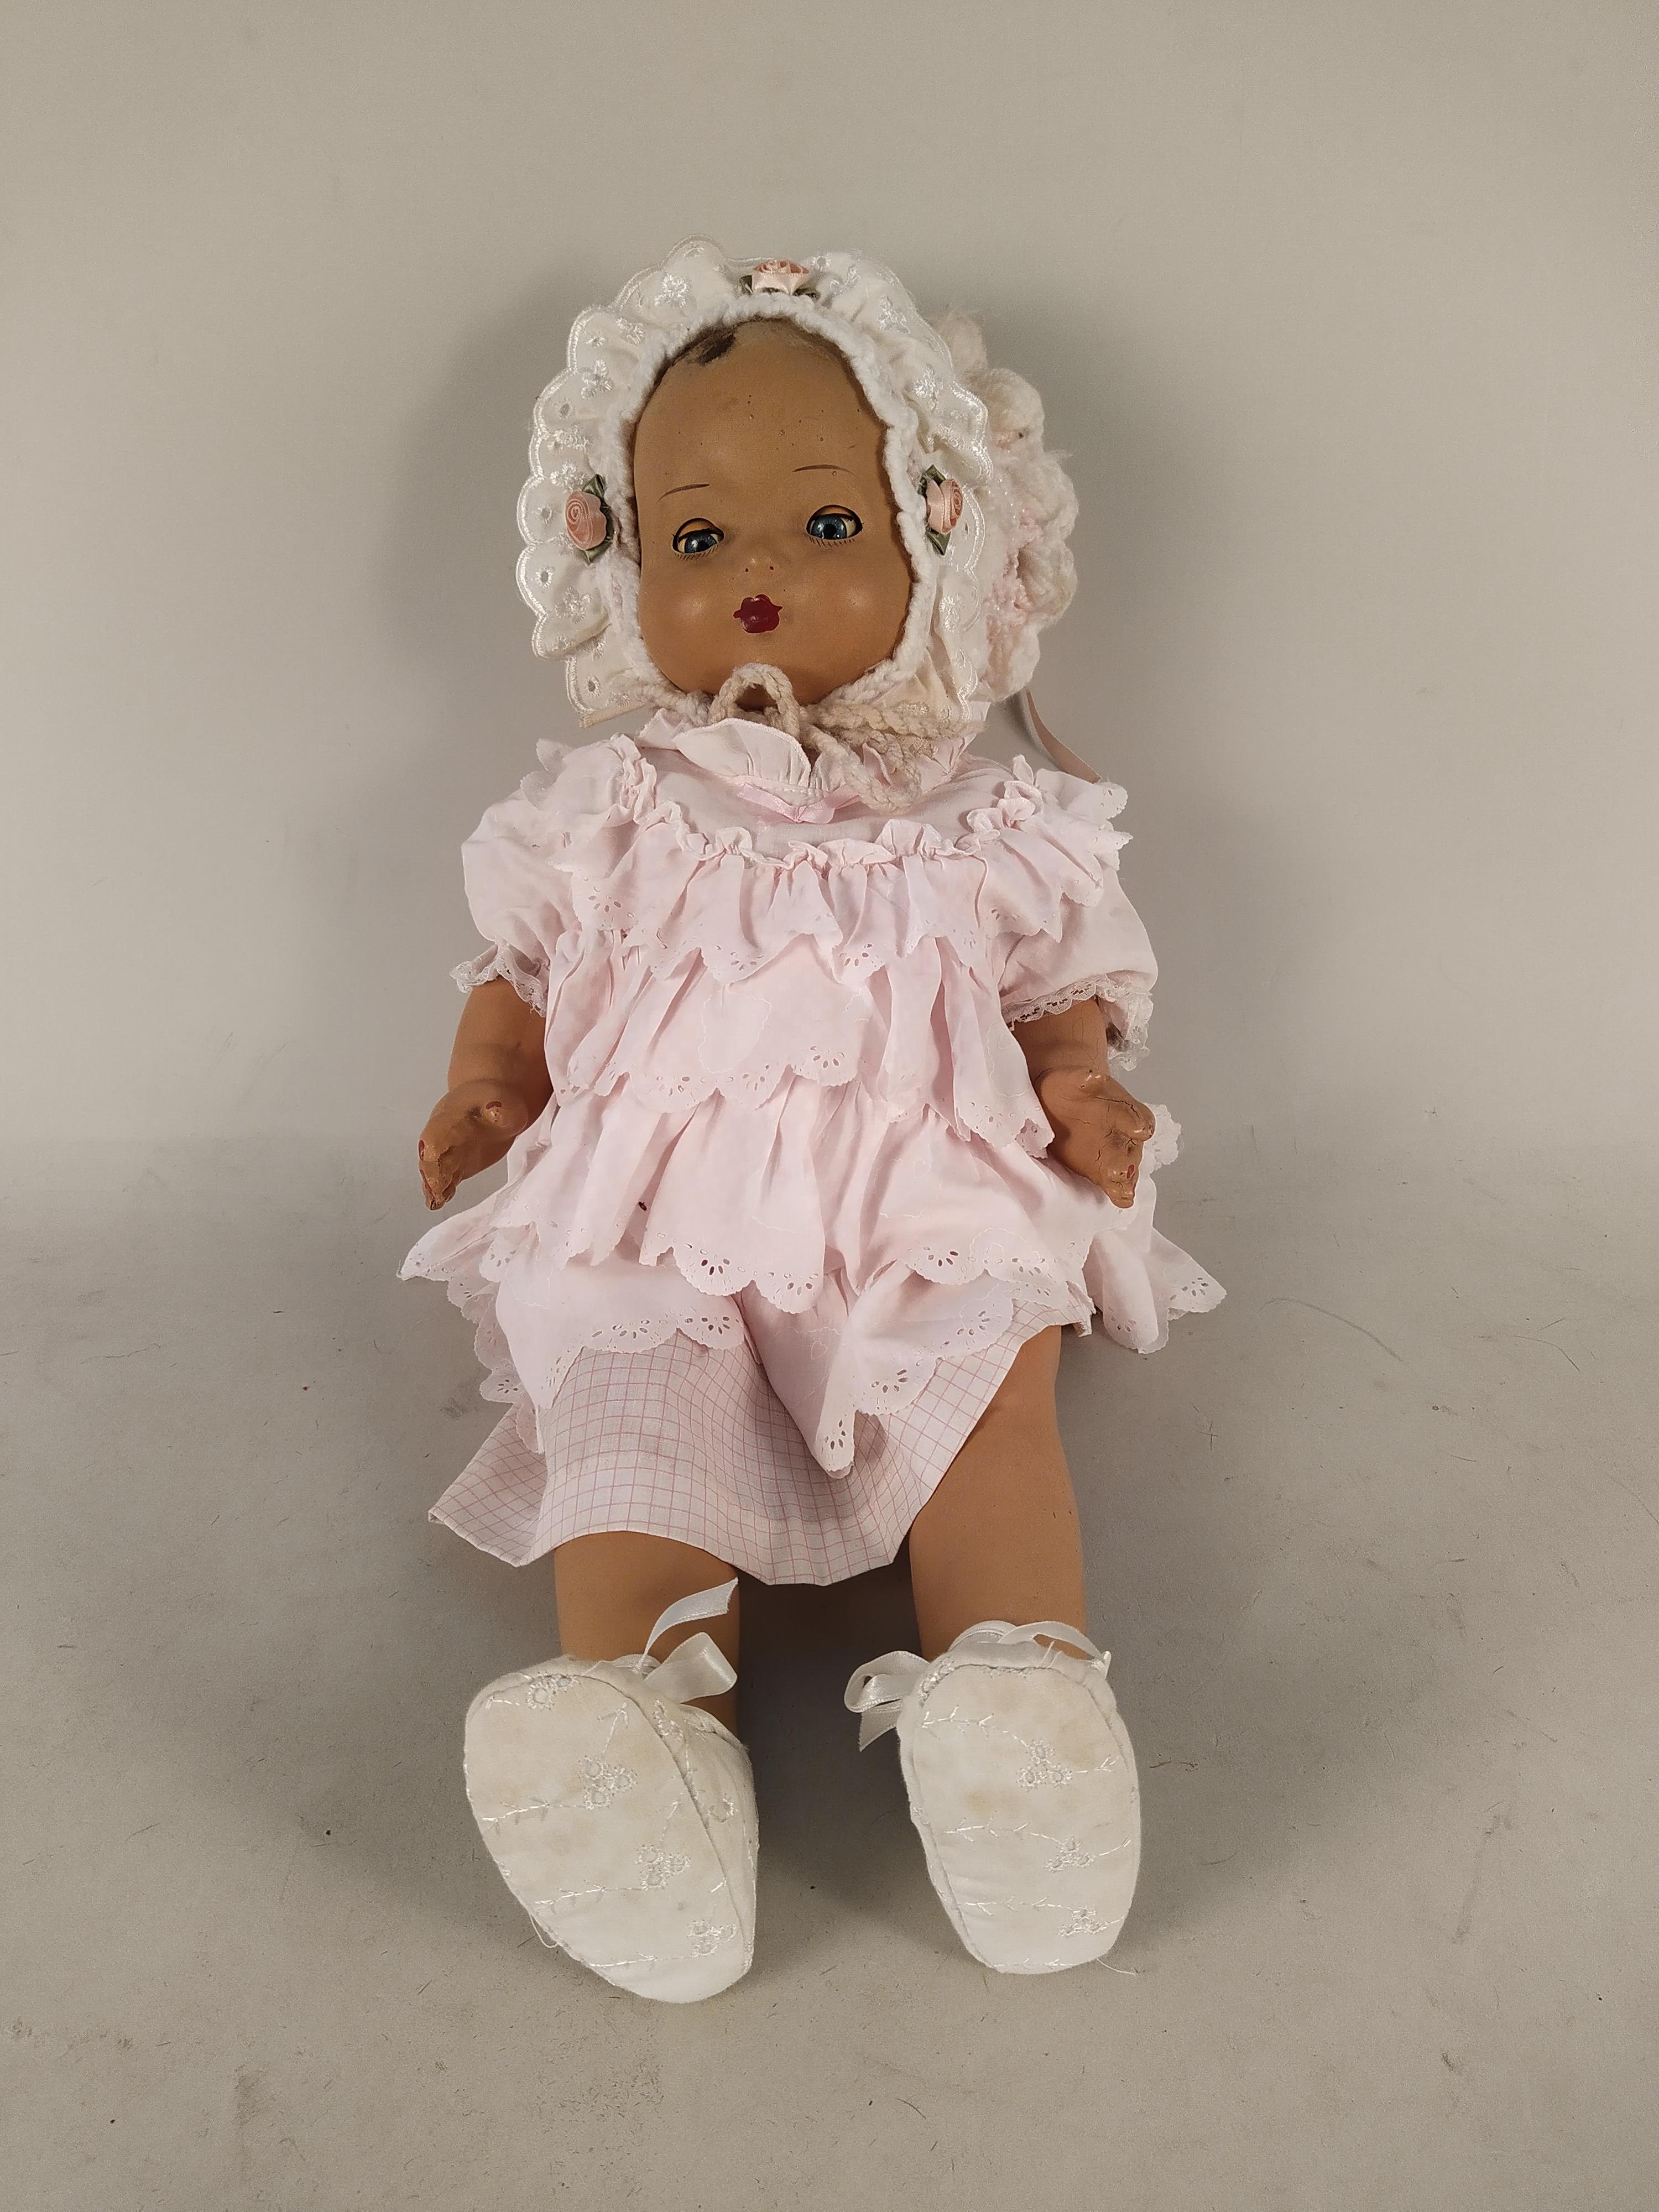 A vintage articulated doll with closing eyes